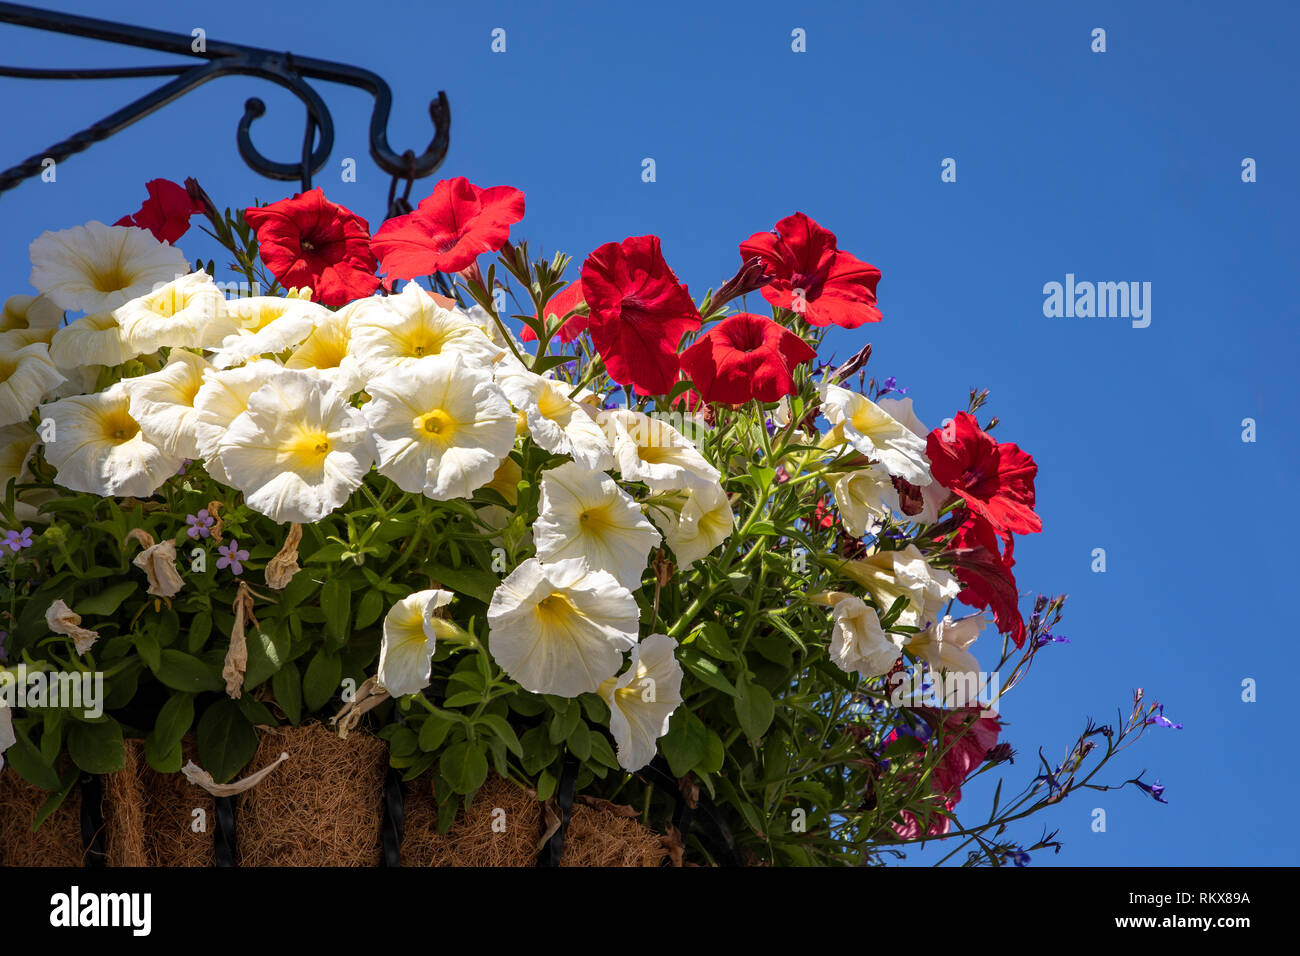 A flower basket hanging in Victoria Street on Alderney, Channel Islands, with clear blue copy space. Stock Photo